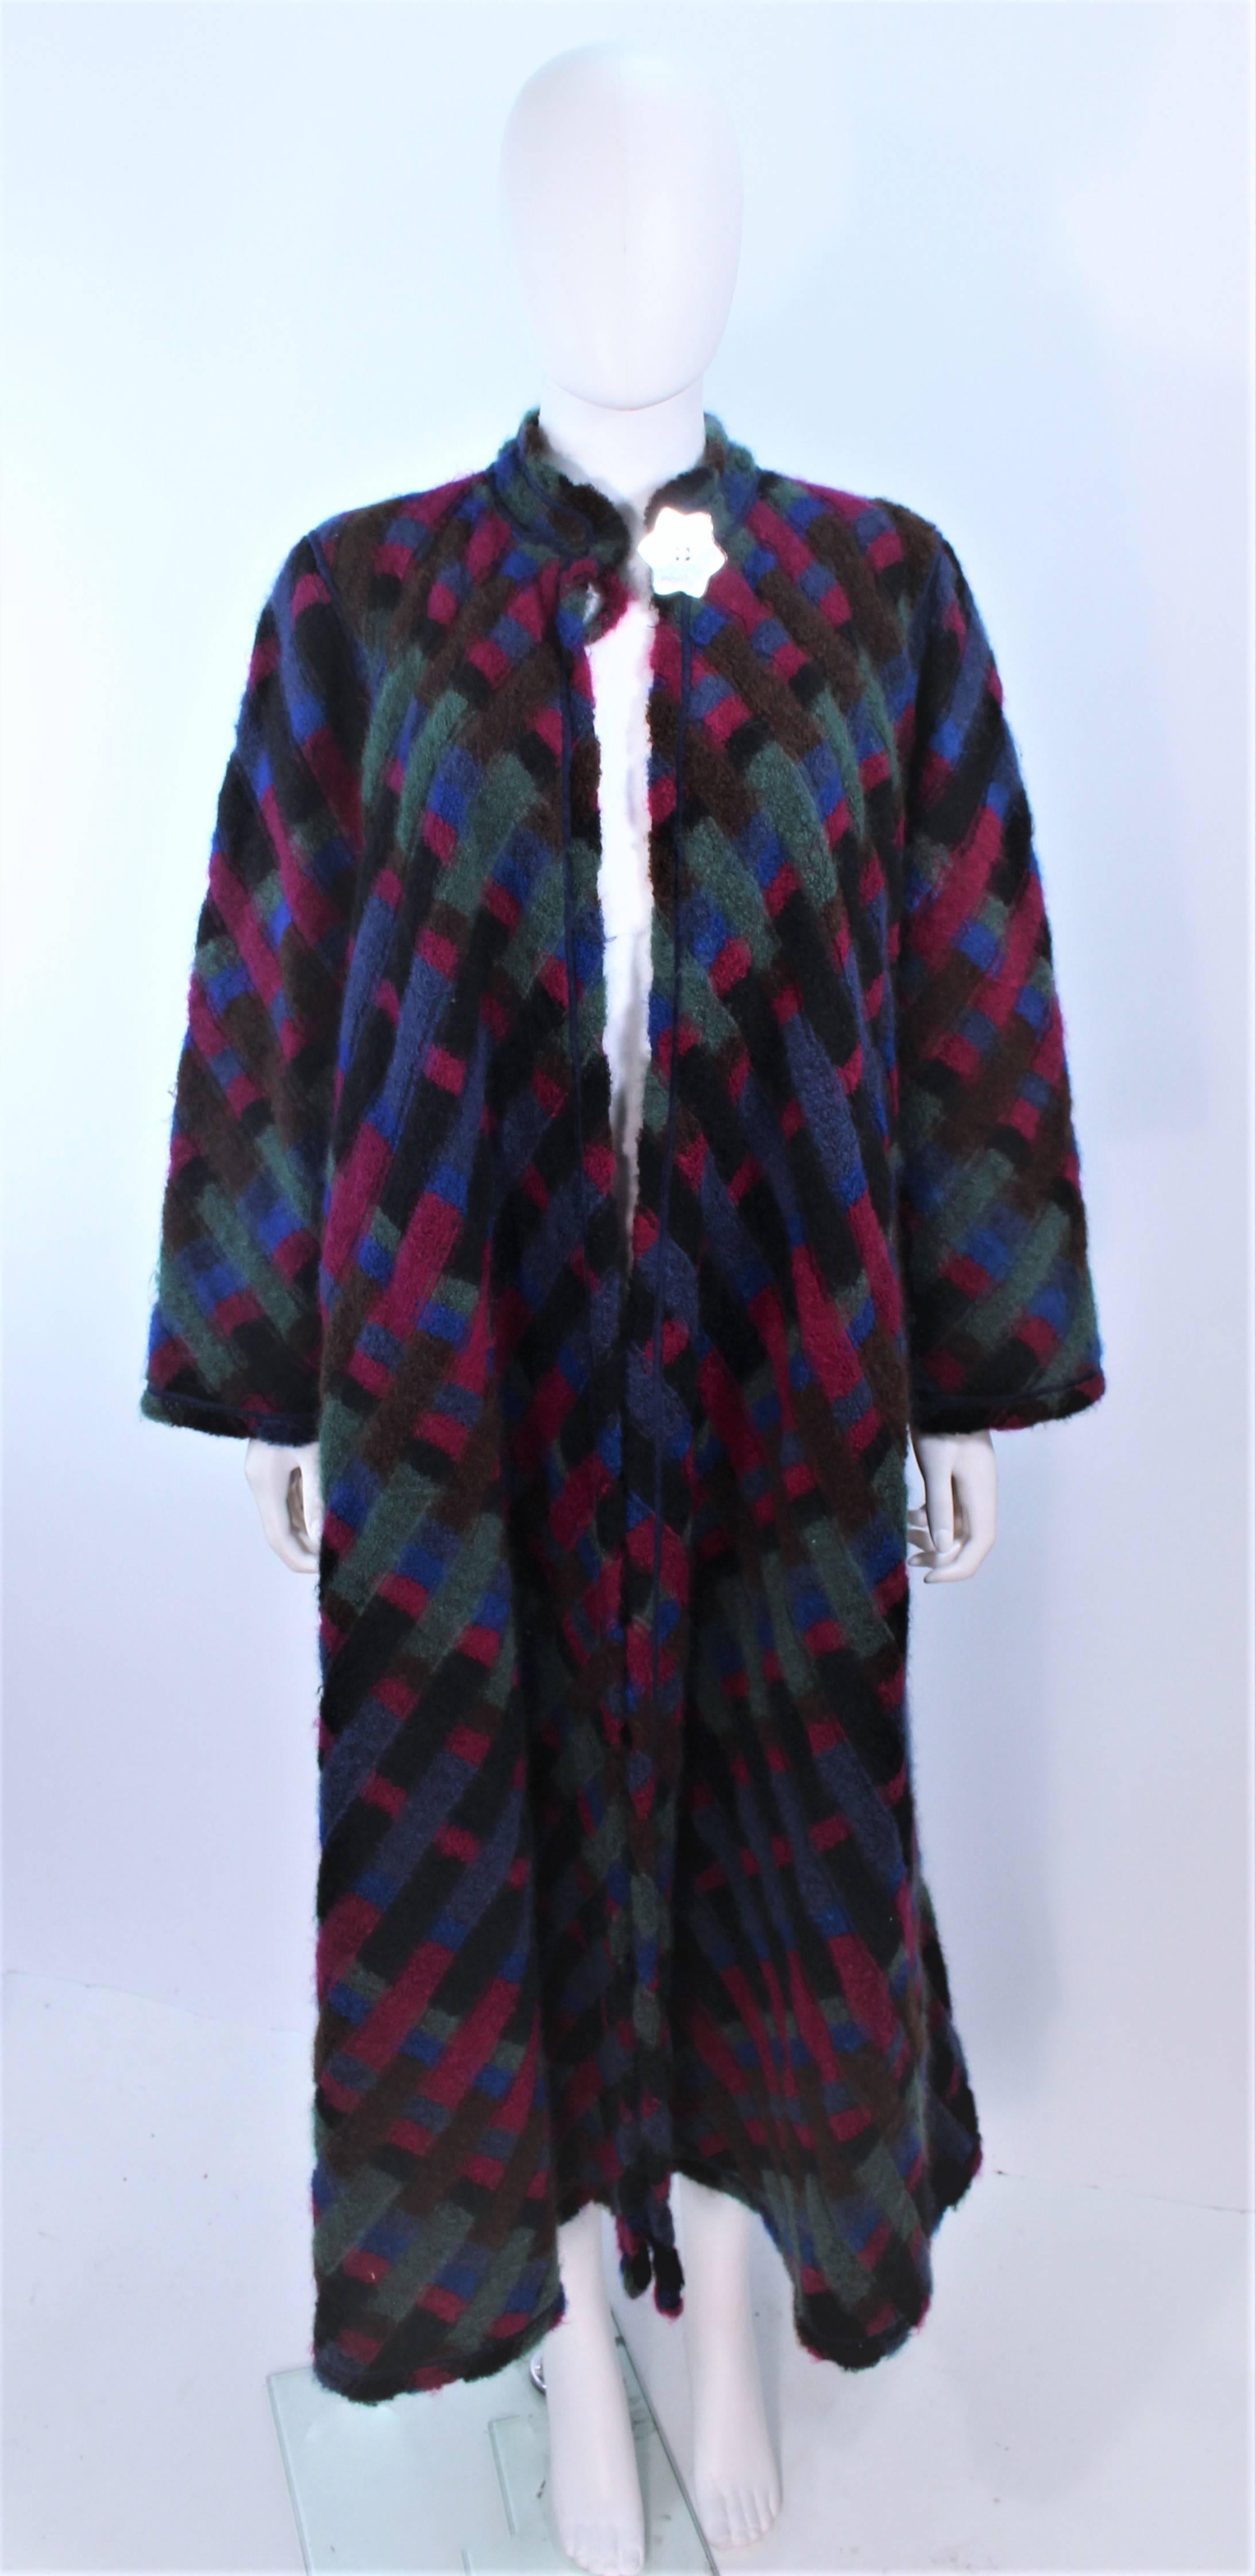 This Missoni design is composed of multi-color knit with a reversible green interior. Features side pockets with a center front mirror star button. In excellent vintage condition.

**Please cross-reference measurements for personal accuracy. Size